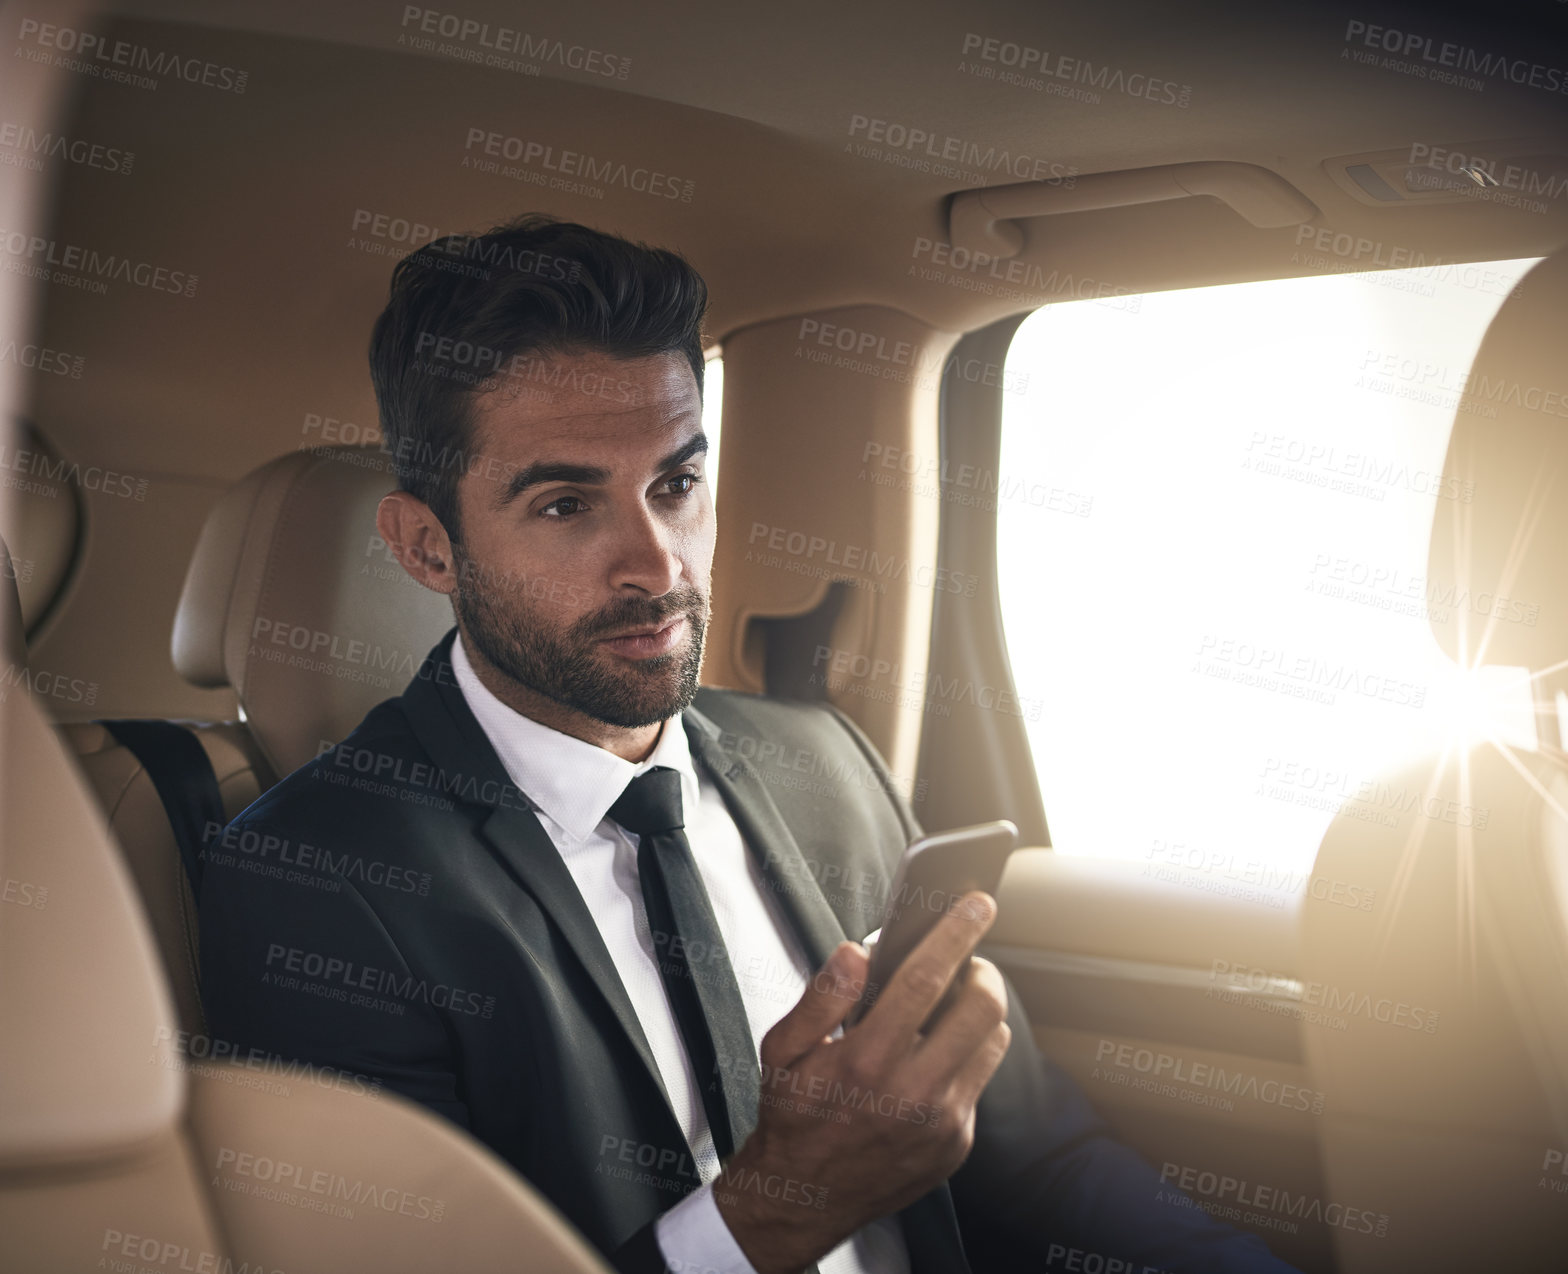 Buy stock photo Cropped shot of a handsome young businessman sending a text message while on his morning commute to work